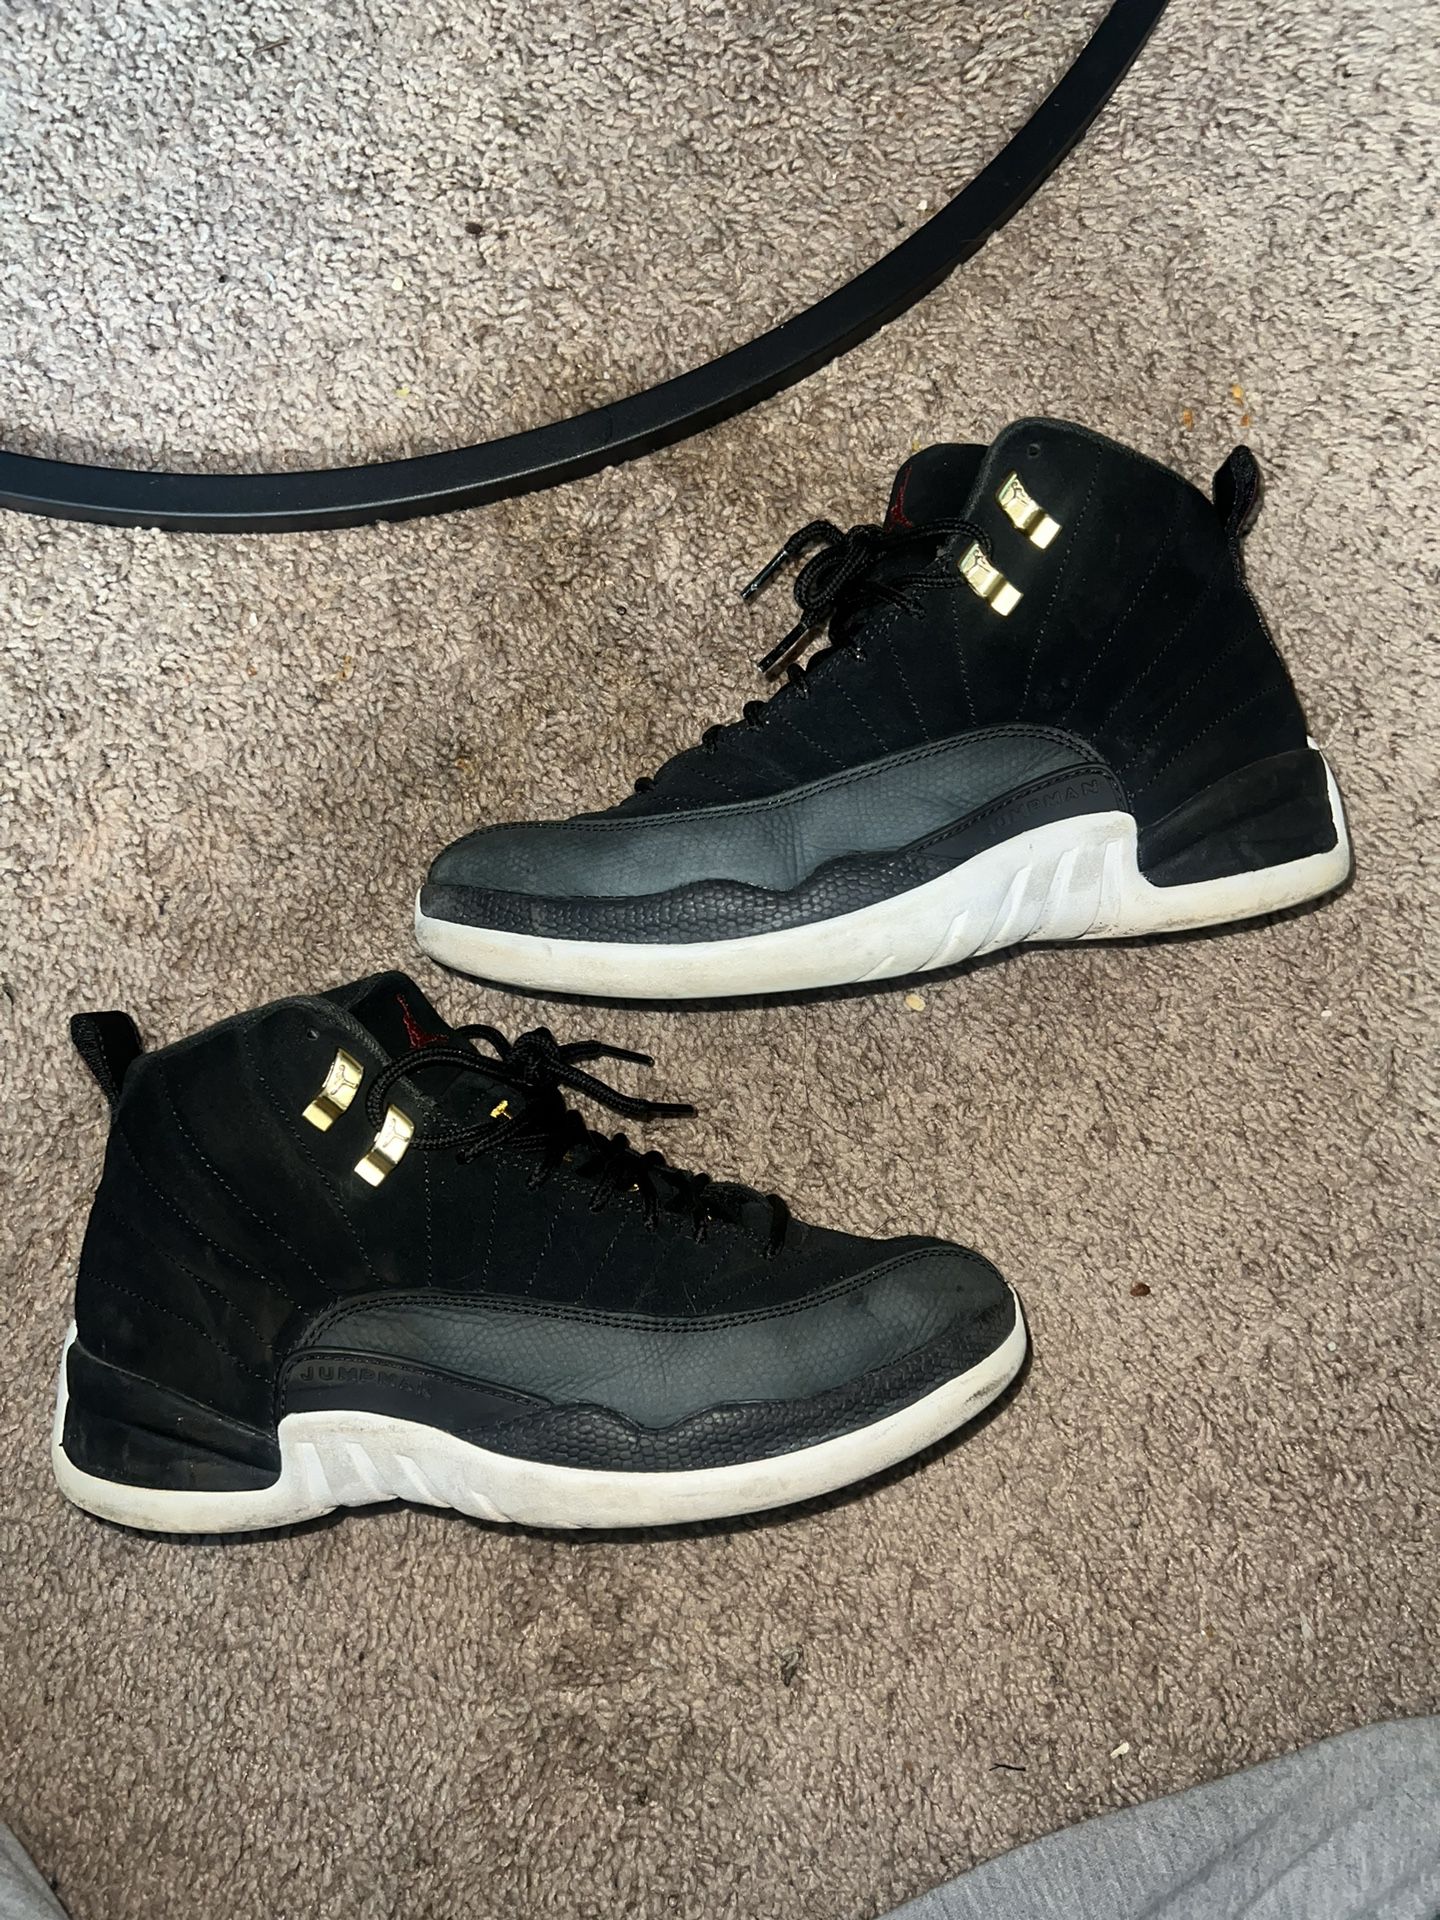 Reverse Taxi 12s